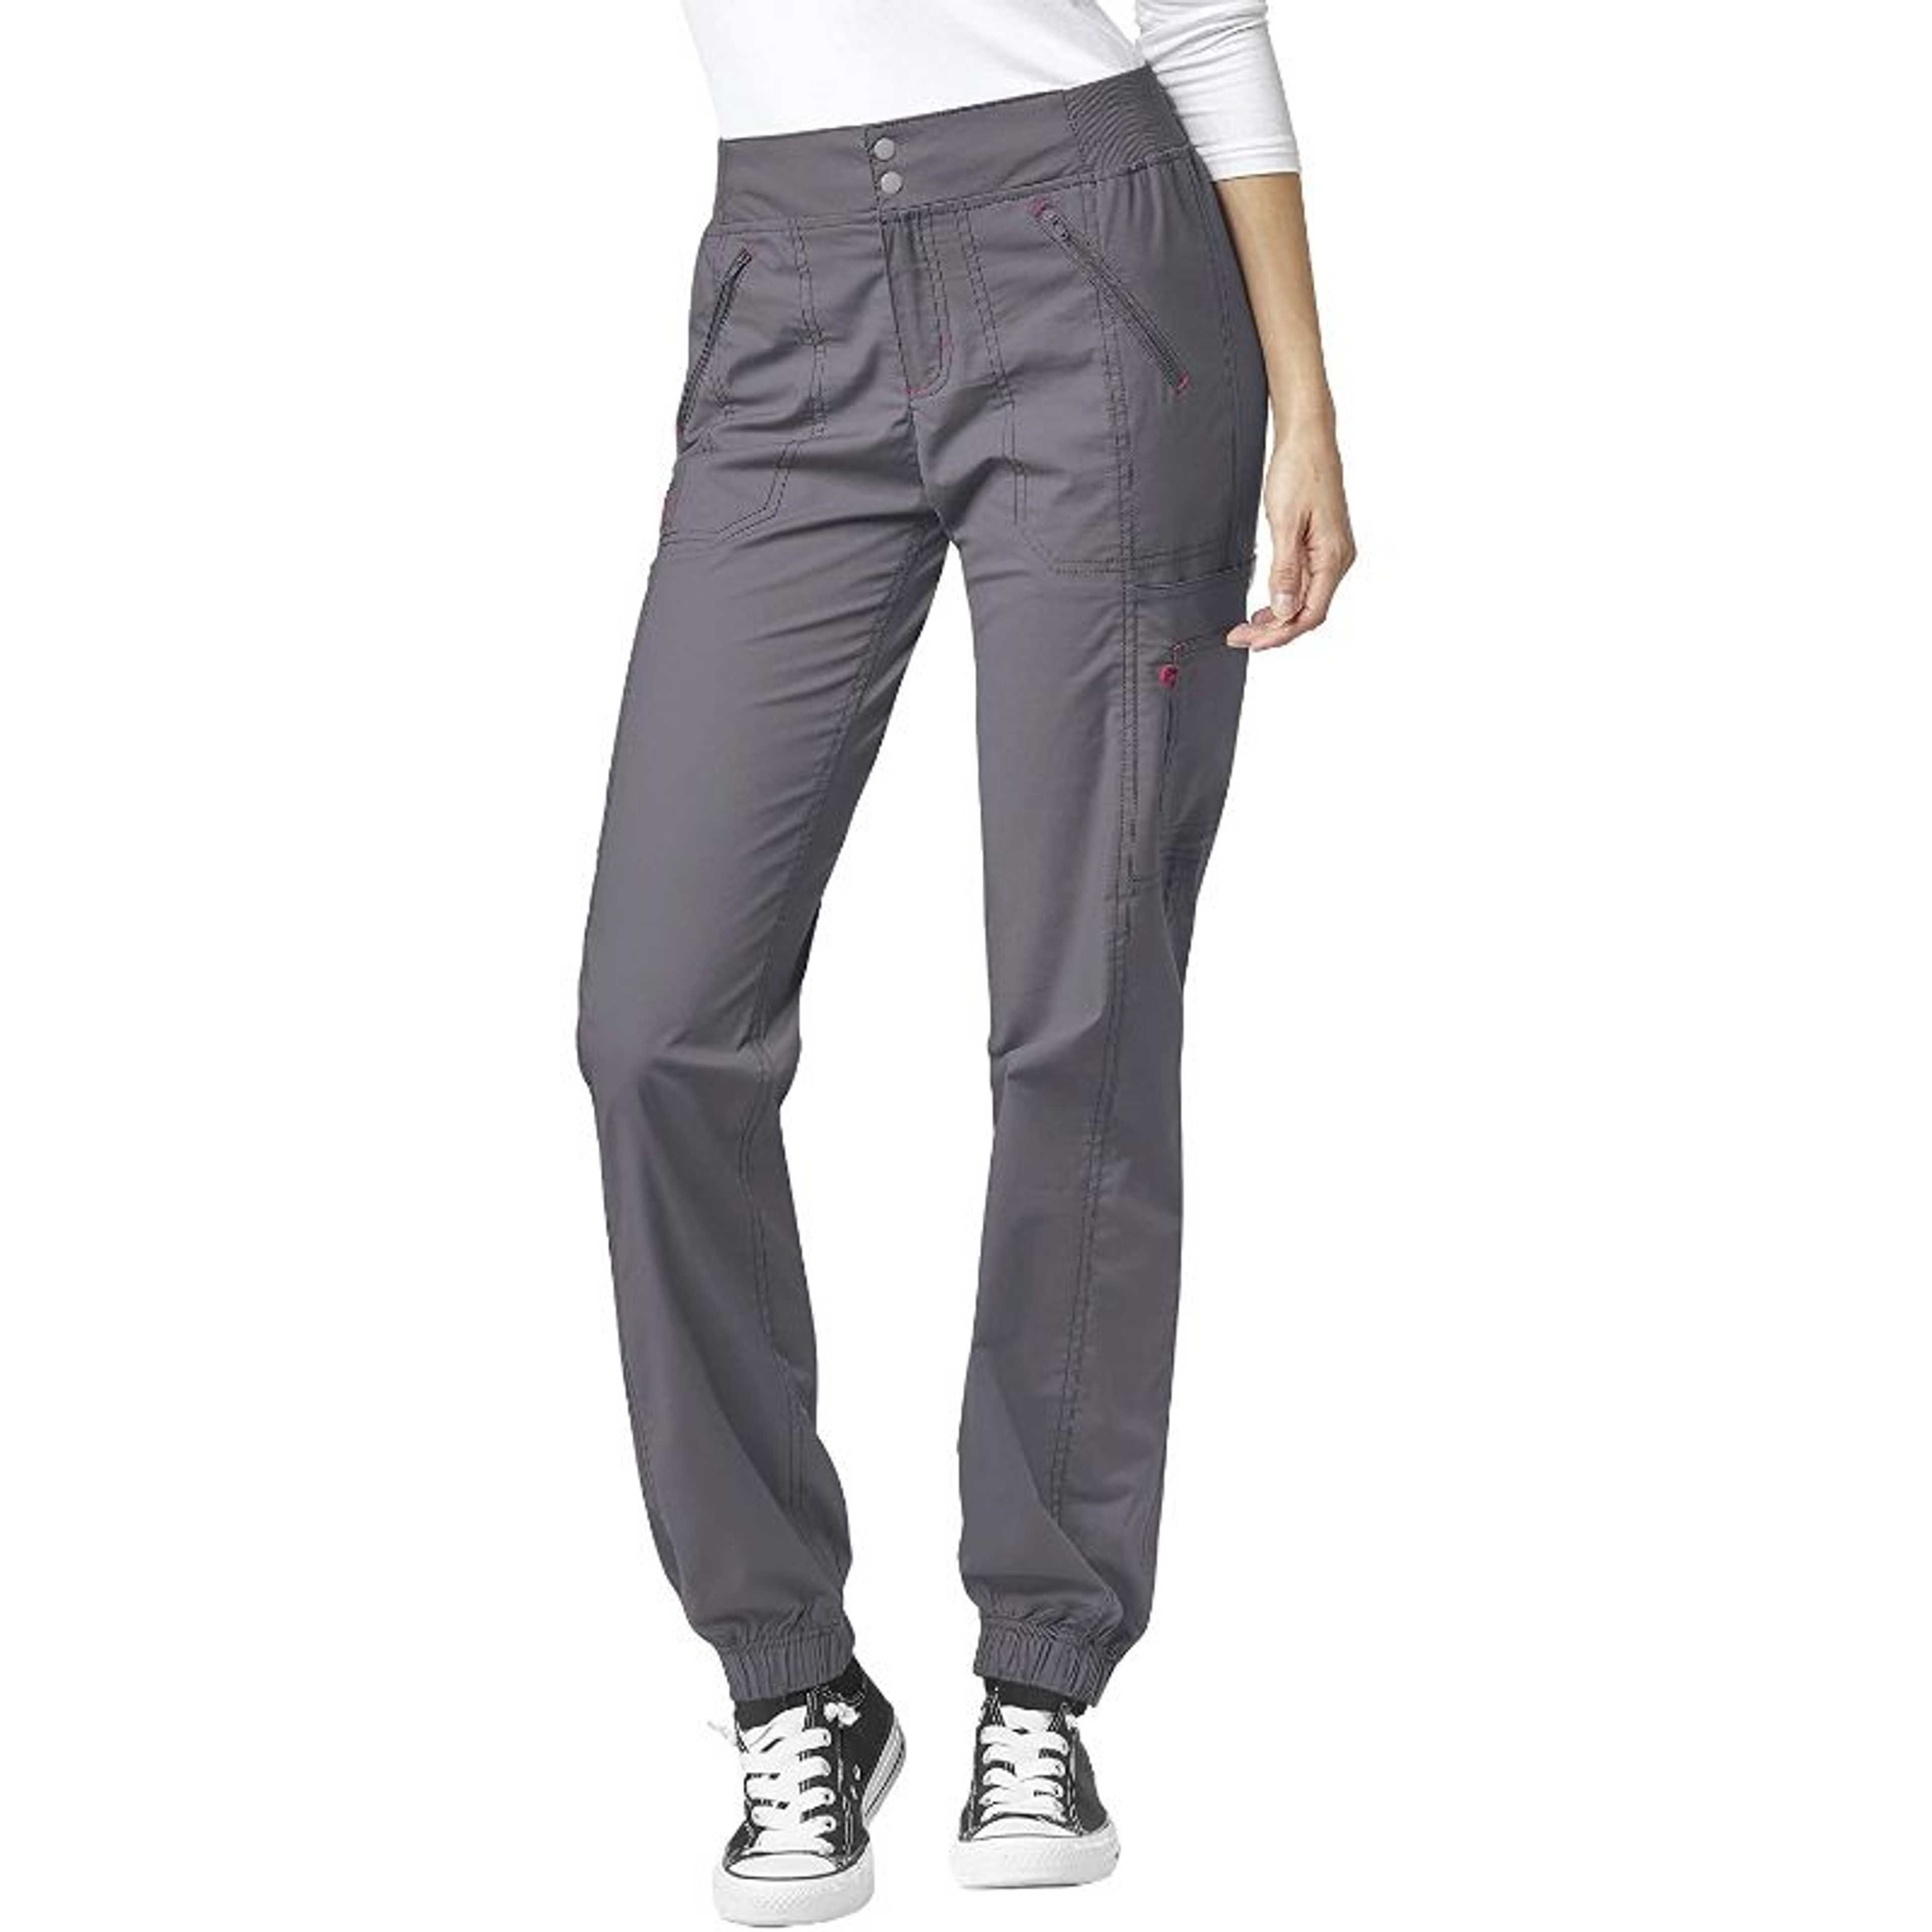 Grey Rubahas Womens Cargo Trousers Ladies Trousers Jeans Pants